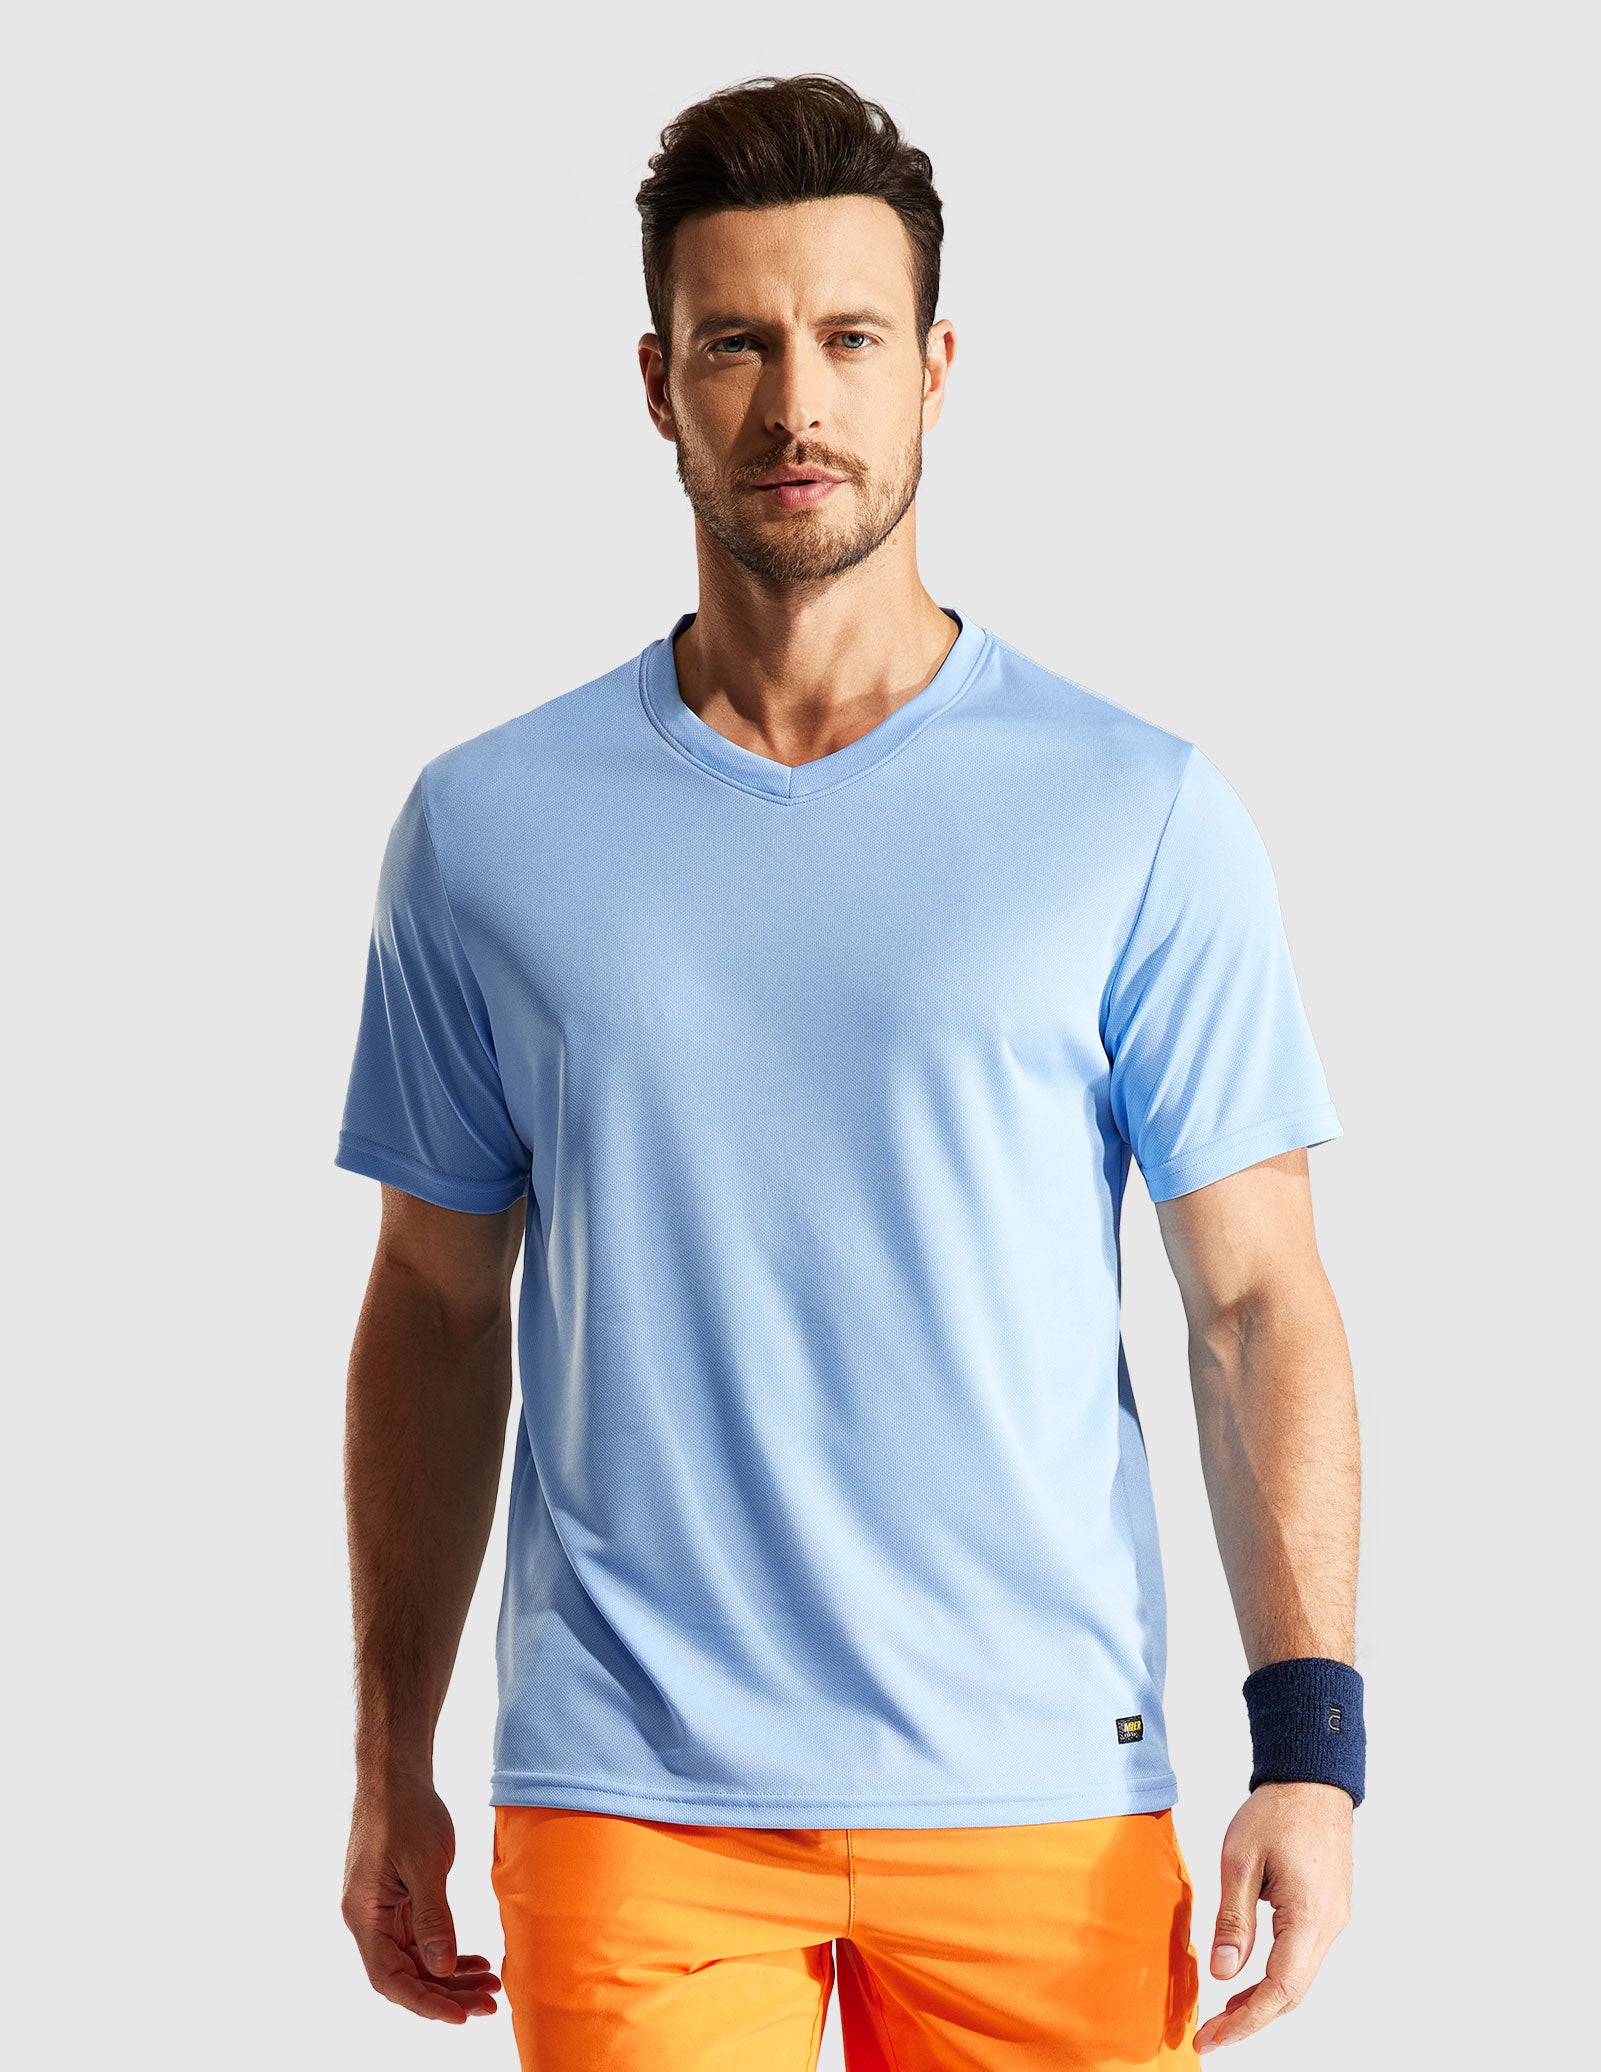 Men's Quick Dry Athletic Shirts V Neck Workout T-Shirts